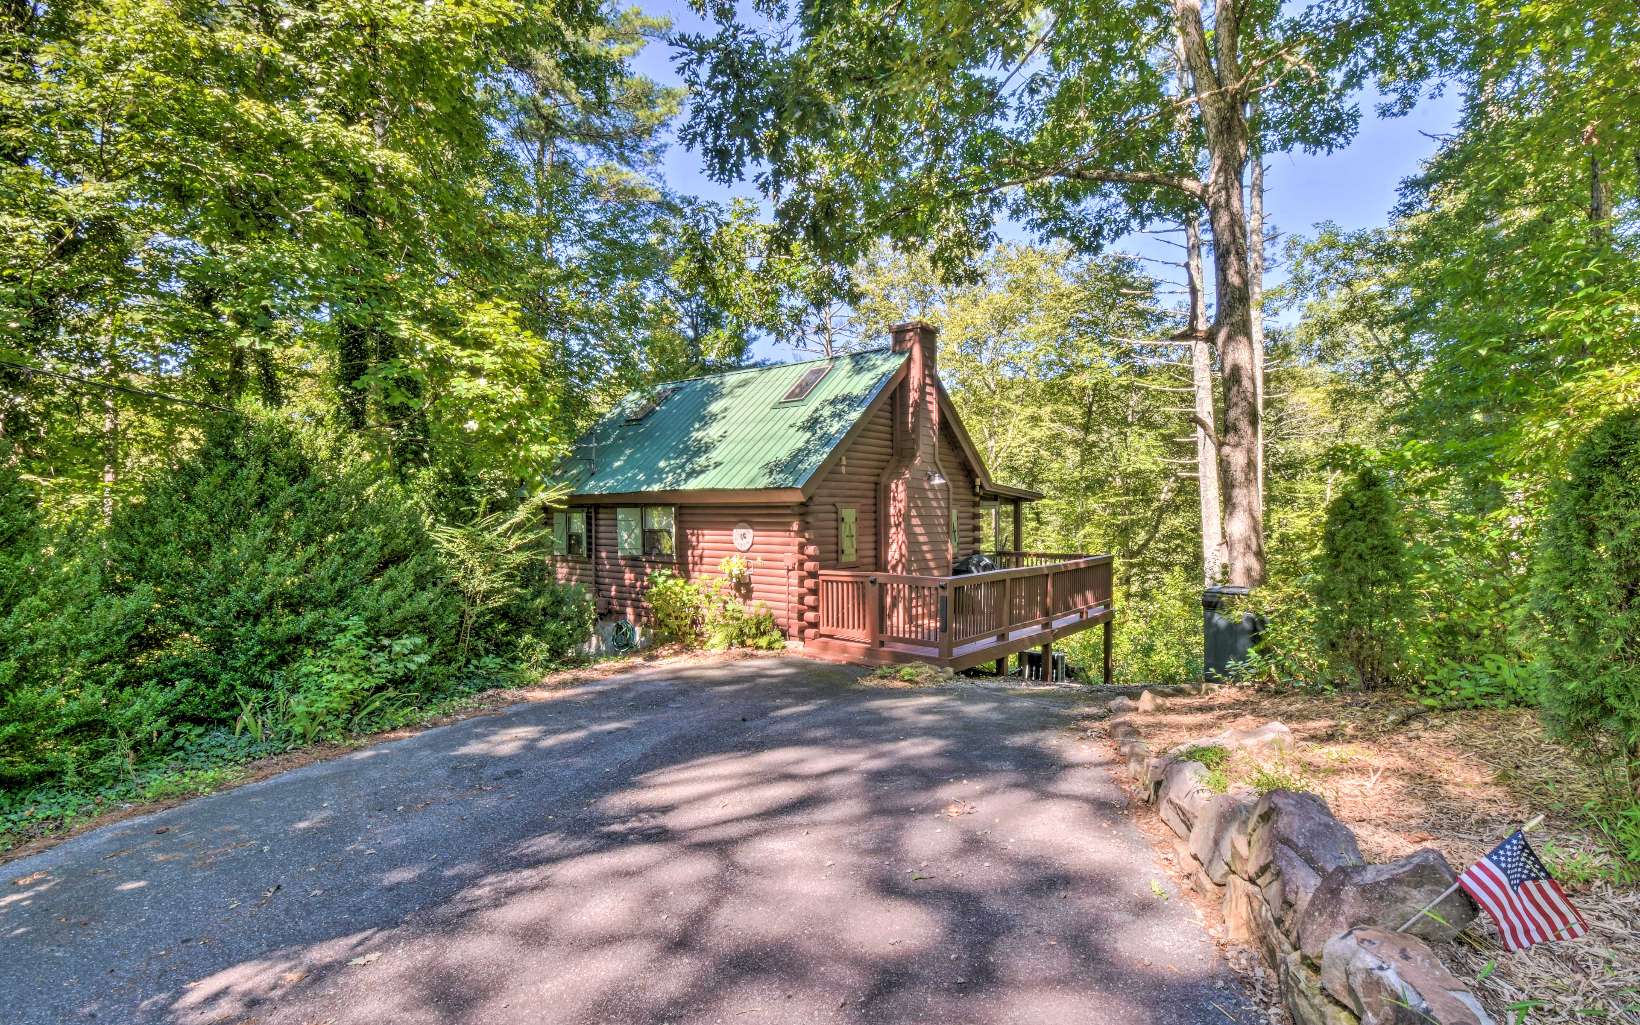 LOOKING FOR THAT NEXT INVESTMENT?!? You found it! Completely turn-key, you can be up and running on day one. There is absolutely nothing needed but you or your guests. The prime time for guests is here now through the holiday season. This gem gets you in the game now. It is a true log cabin in highly sought after Cherry Log / Blue Ridge area. Centrally located in the region with easy access to all corners. All paved access, just off of HWY76. Super convenient to Downtown Blue Ridge, Lake Blue Ridge, Toccoa River & Aska Adventure Area! This cabin embraces the open living concept and just feels like home when you step into the great room with vaulted ceilings, hard wood floors & stone fireplace. You can enjoy your morning coffee on the screened porch or on the deck and enjoy the peaceful surroundings. Lower level boasts a hot tub, & large crawl space that is perfect for storage and outdoor "toys". Cozy fire pit is also located in the back yard for those evening s'mores. Private wooded lot. Come get your slice of heaven or your next investment adventure!